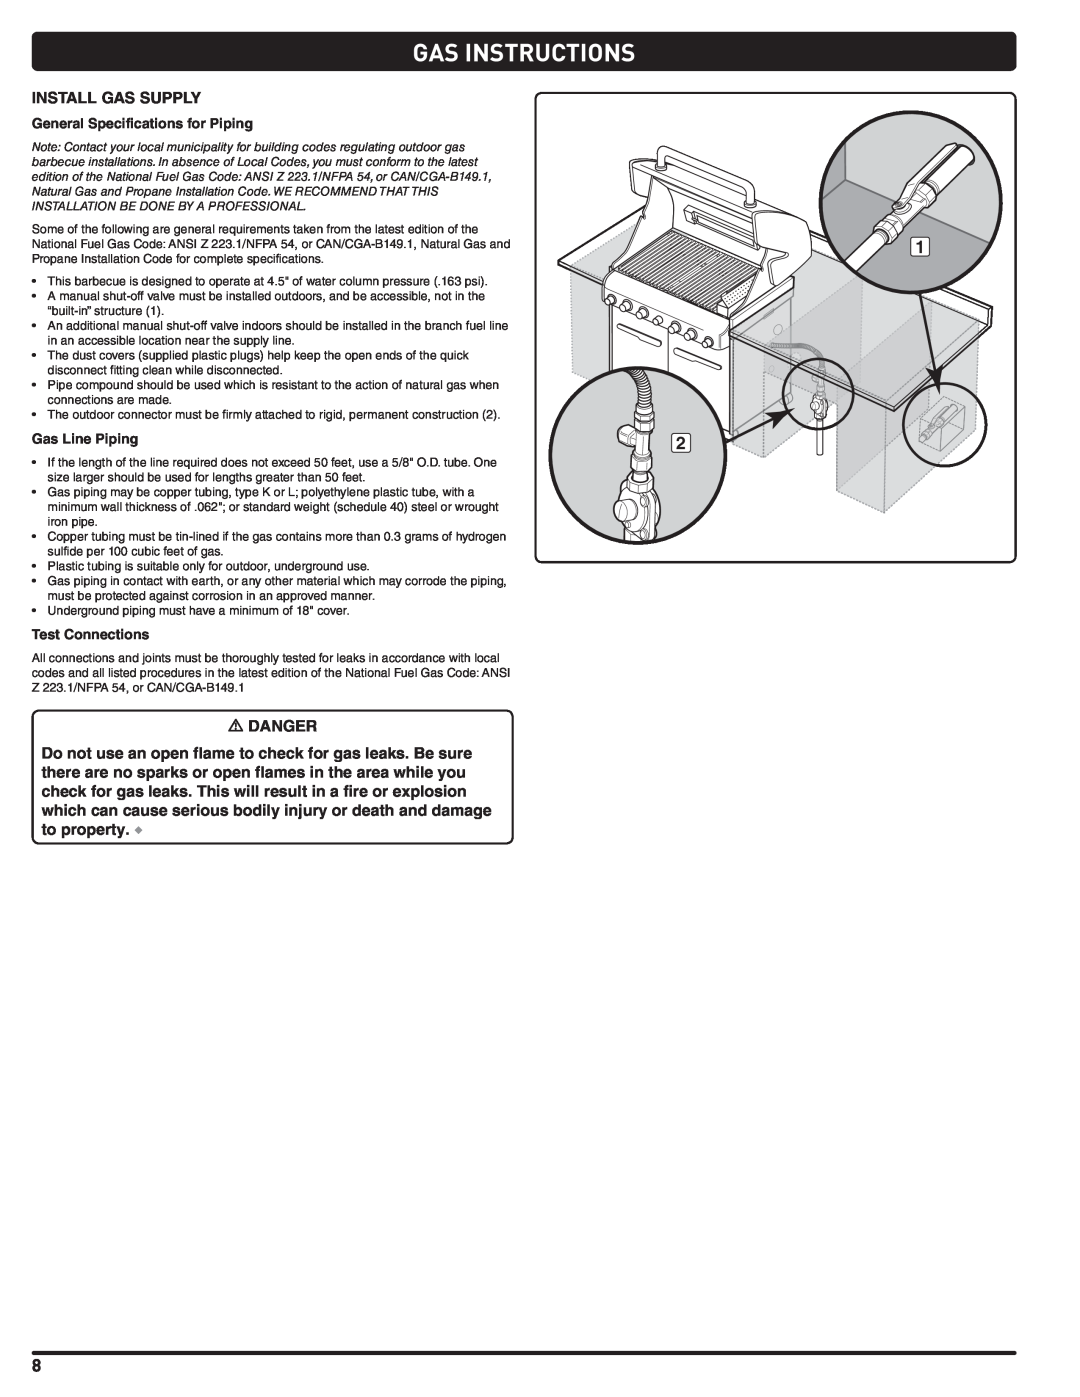 Weber 56576 manual Gas Instructions, General Specifications for Piping, Gas Line Piping, Test Connections 